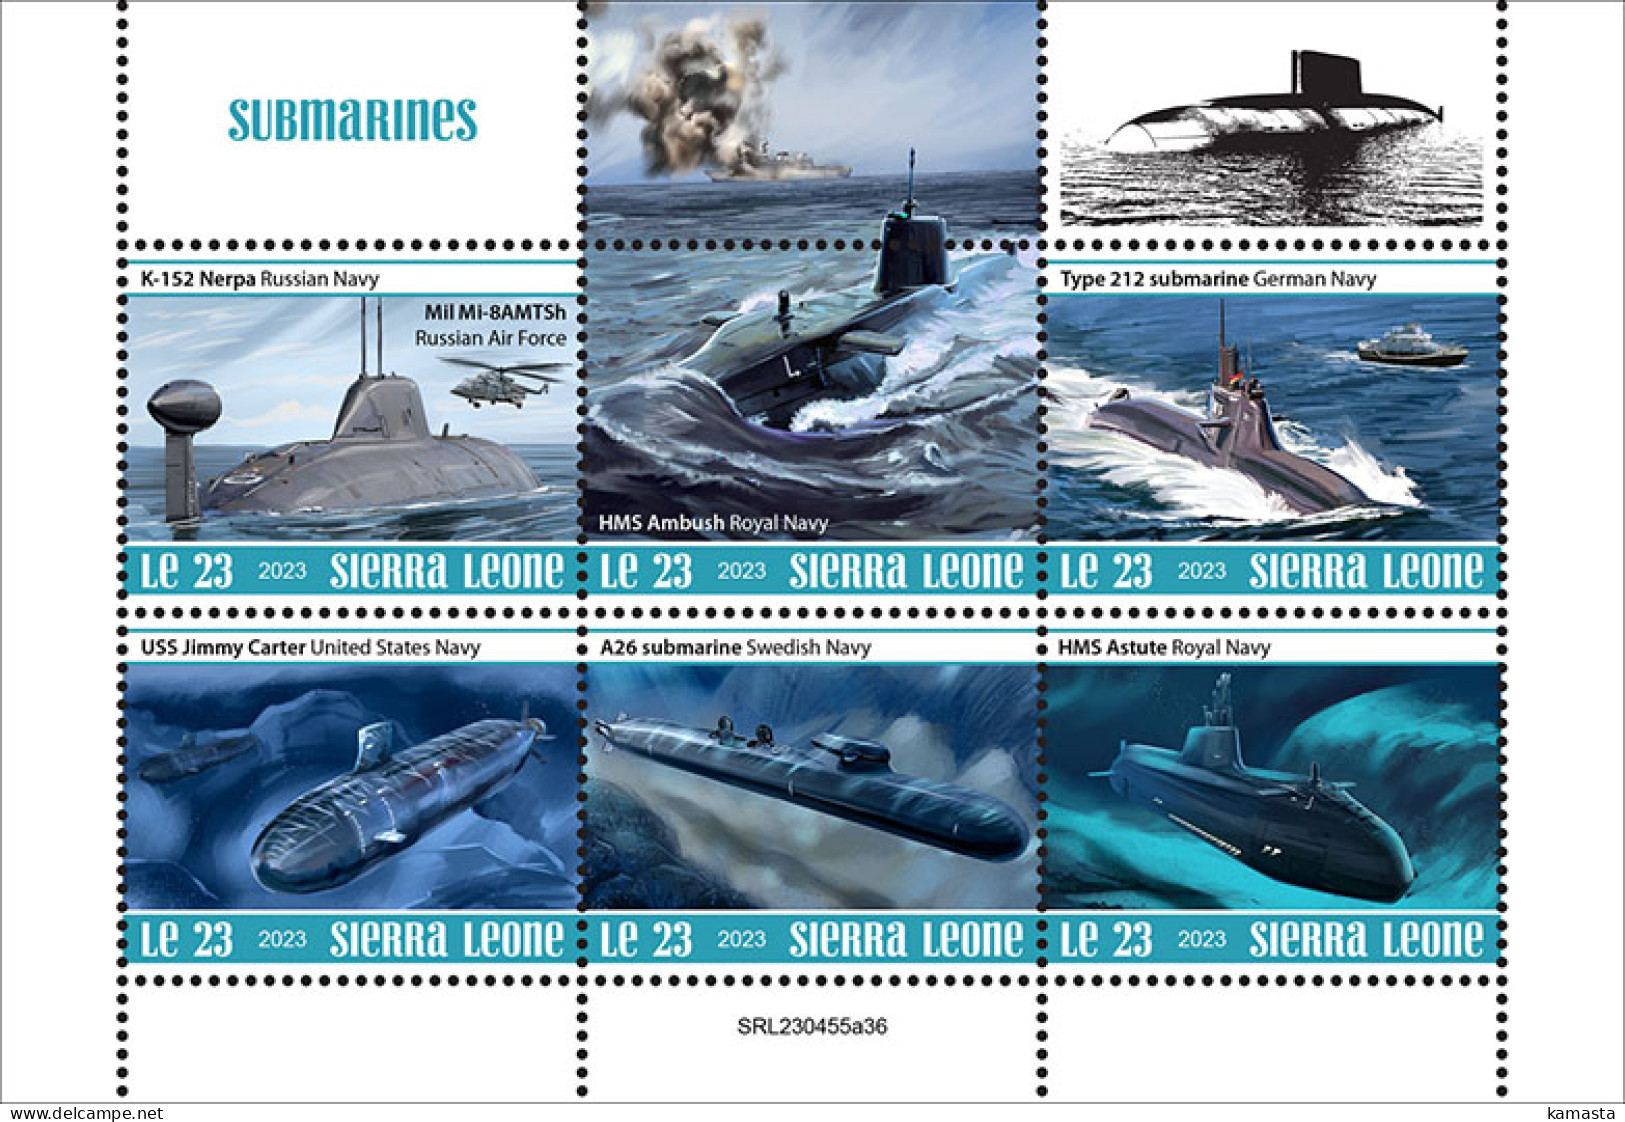 Sierra Leone  2023 Submarines. (445a36) OFFICIAL ISSUE - Submarines